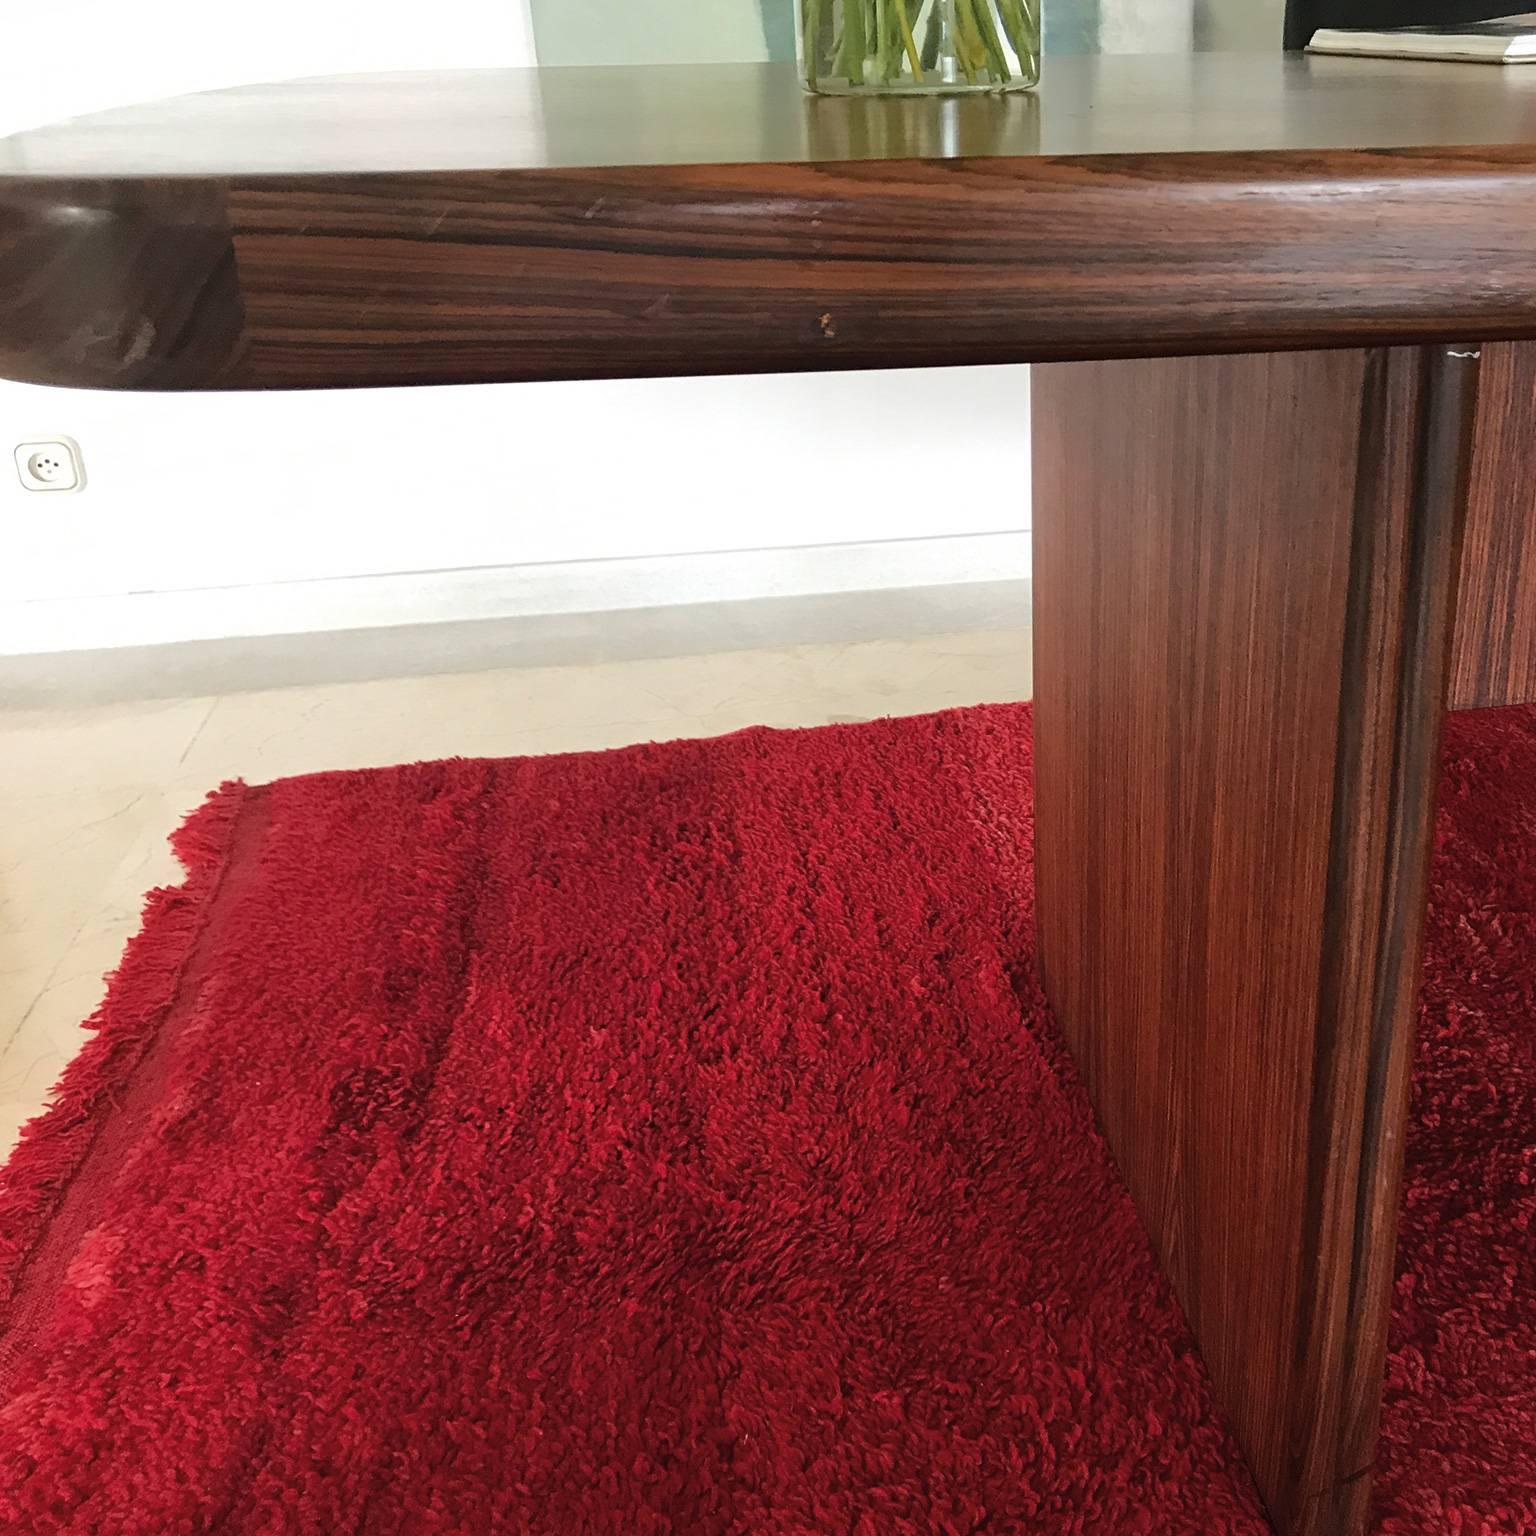 This piece is an elegant rosewood desk designed in 1970s and attributed to Carlos Casablanques, Spanish architect.